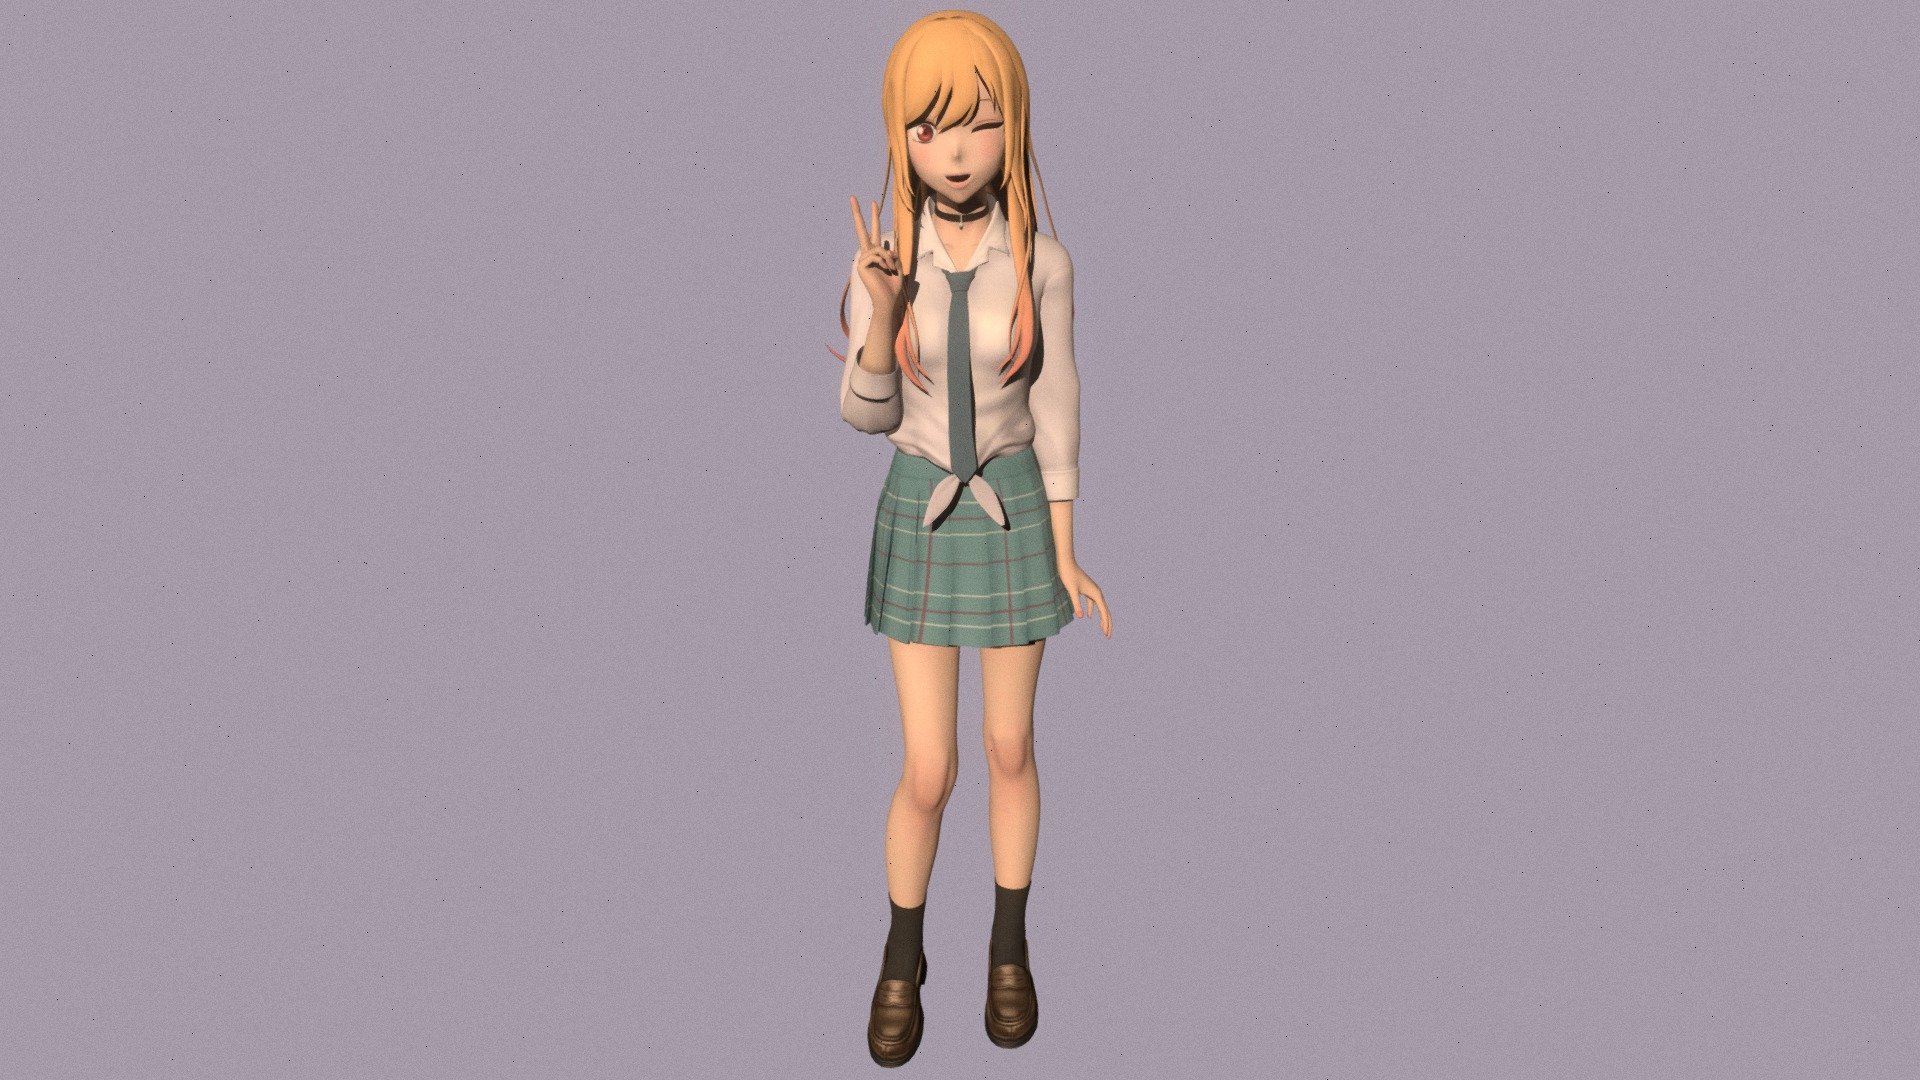 Posed model of anime girl Marin Kitagawa (My Dress-Up Darling).

This product include .FBX (ver. 7200) and .MAX (ver. 2010) files.

Rigged version: https://sketchfab.com/3d-models/t-pose-rigged-model-of-marin-kitagawa-534a1f56fdcd49c5bc307e3faf31c557

I support convert this 3D model to various file formats: 3DS; AI; ASE; DAE; DWF; DWG; DXF; FLT; HTR; IGS; M3G; MQO; OBJ; SAT; STL; W3D; WRL; X.

You can buy all of my models in one pack to save cost: https://sketchfab.com/3d-models/all-of-my-anime-girls-c5a56156994e4193b9e8fa21a3b8360b

And I can make commission models.

If you have any questions, please leave a comment or contact me via my email 3d.eden.project@gmail.com 3d model